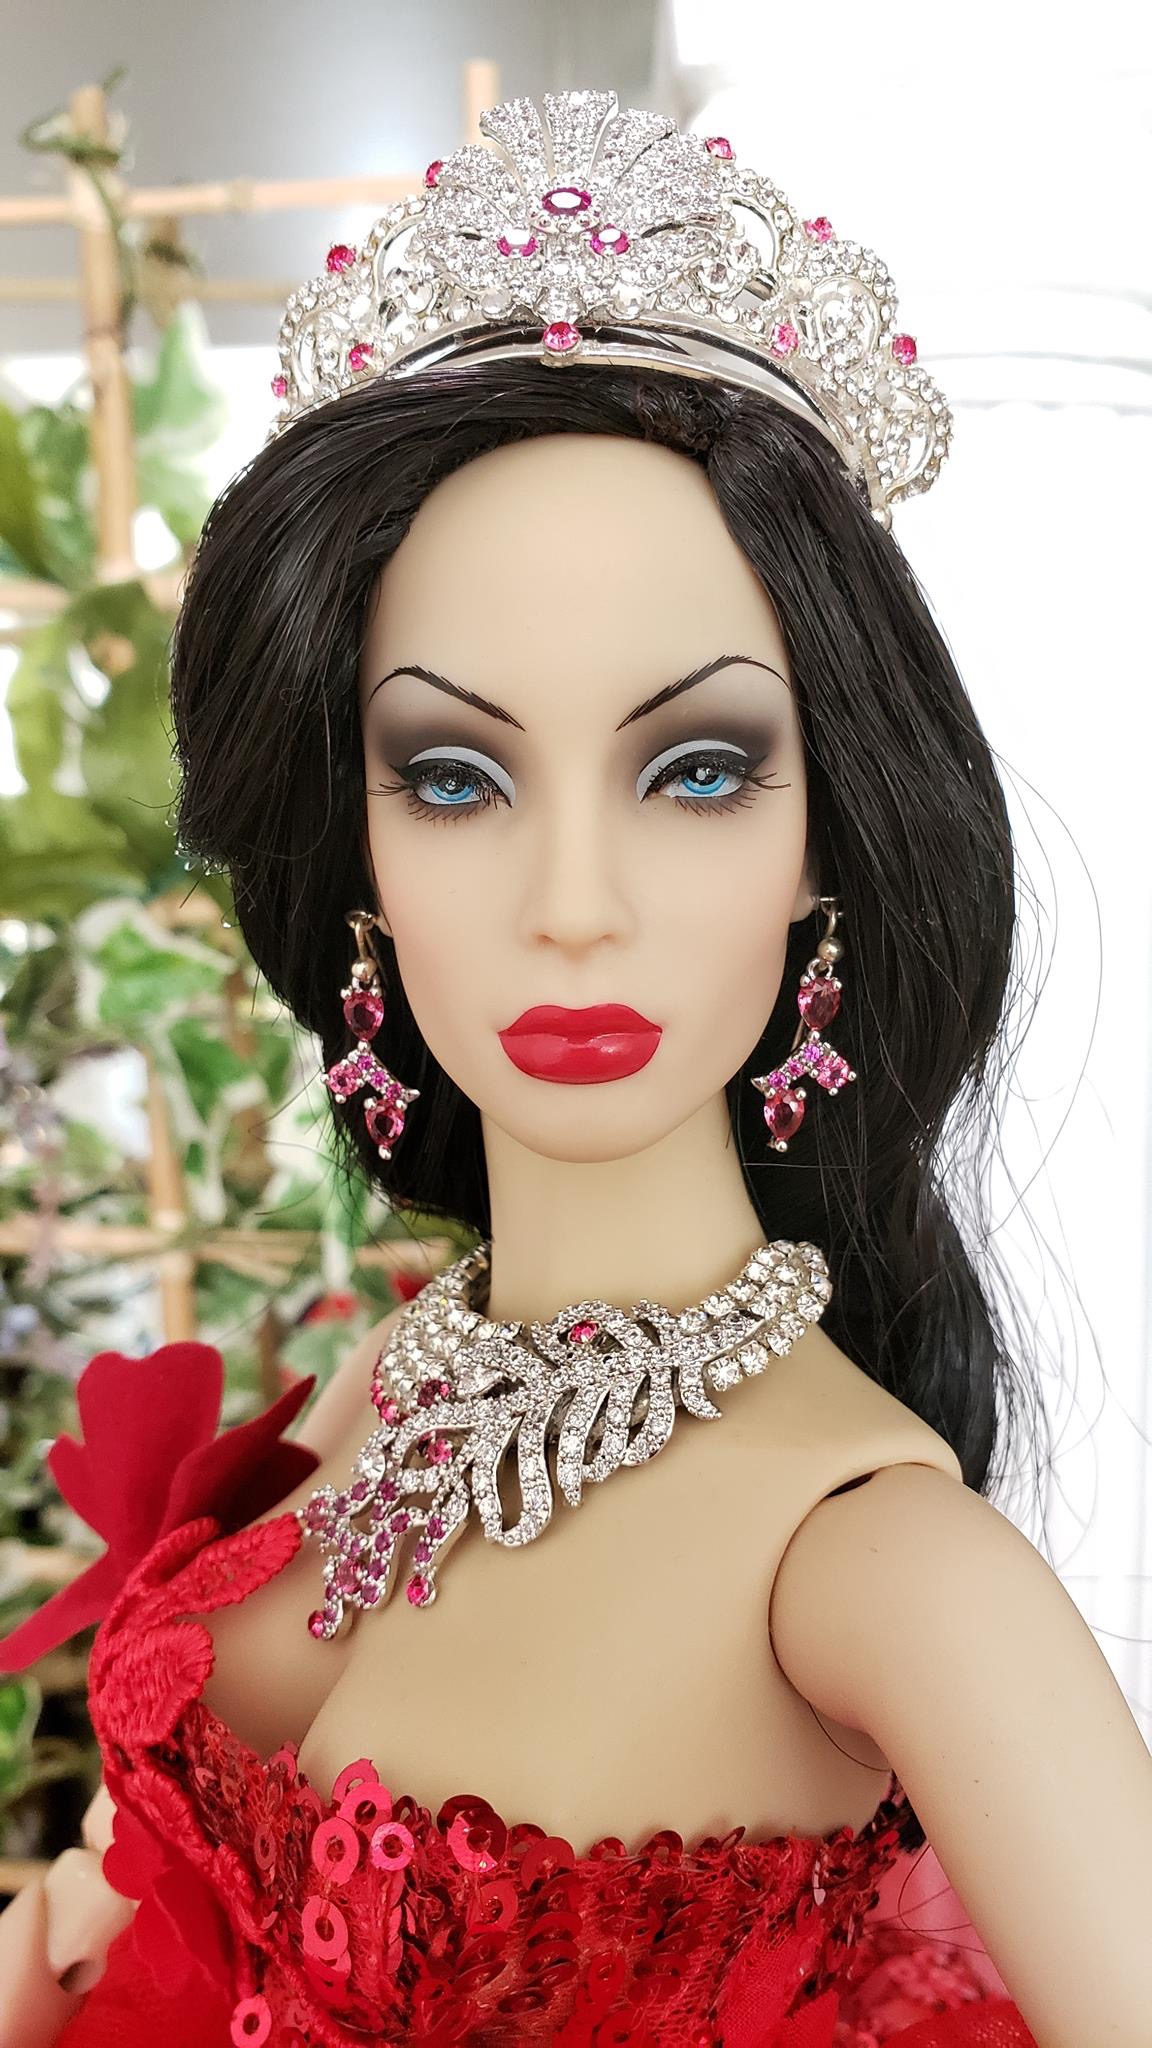 Jewels for 16" dolls